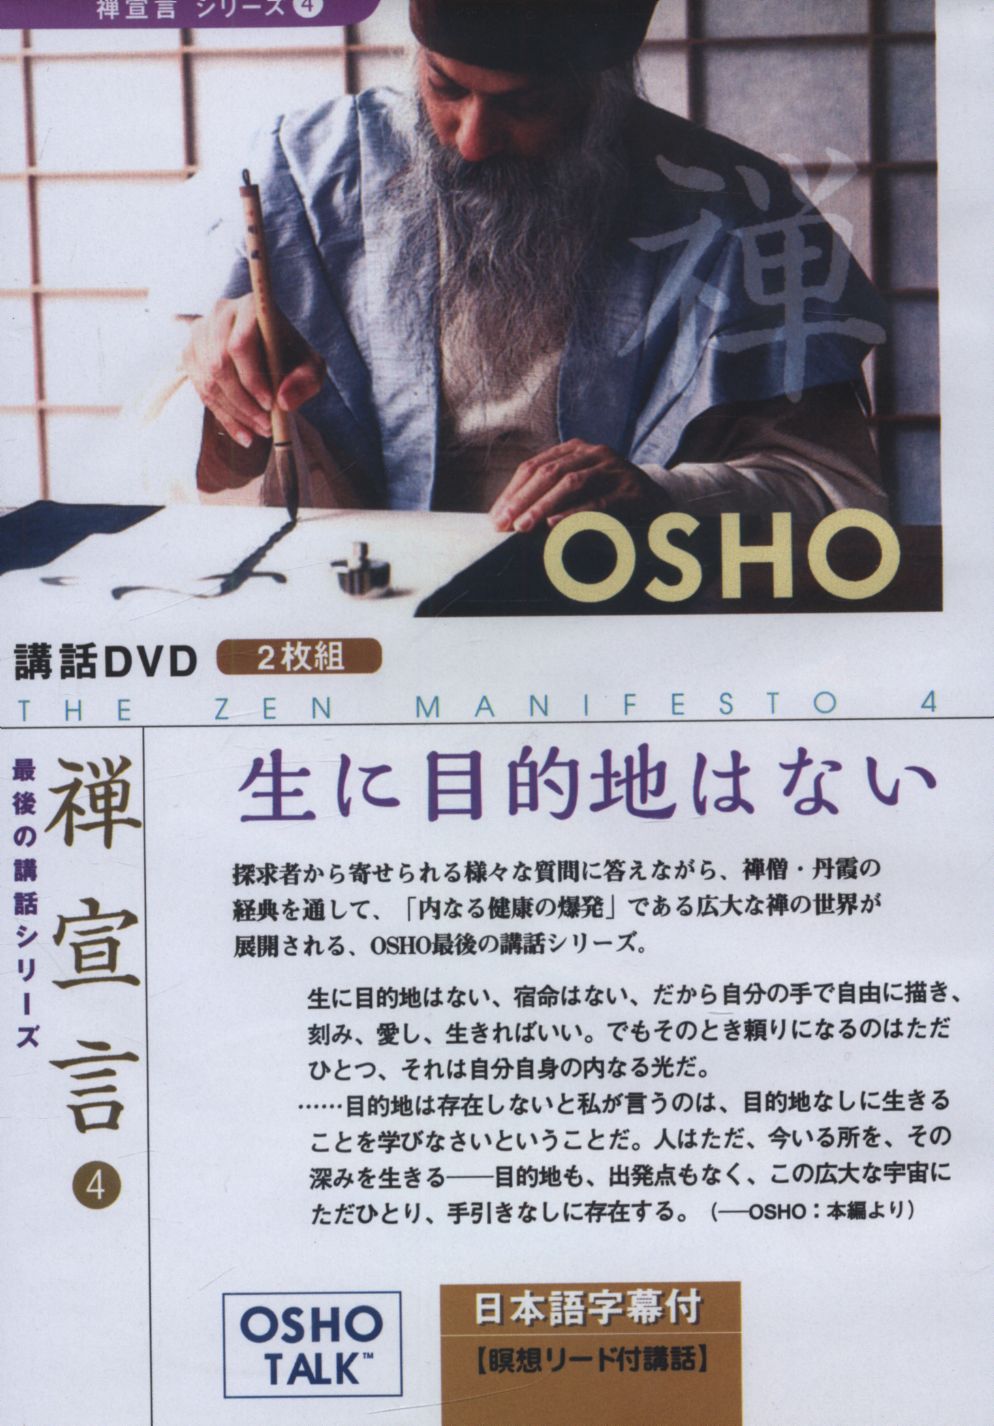 Lecture Dvd Zen Declaration Series Not 4 Osho Purpose In A Lifetime Osho The End Of The Lecture Series Mandarake 在线商店